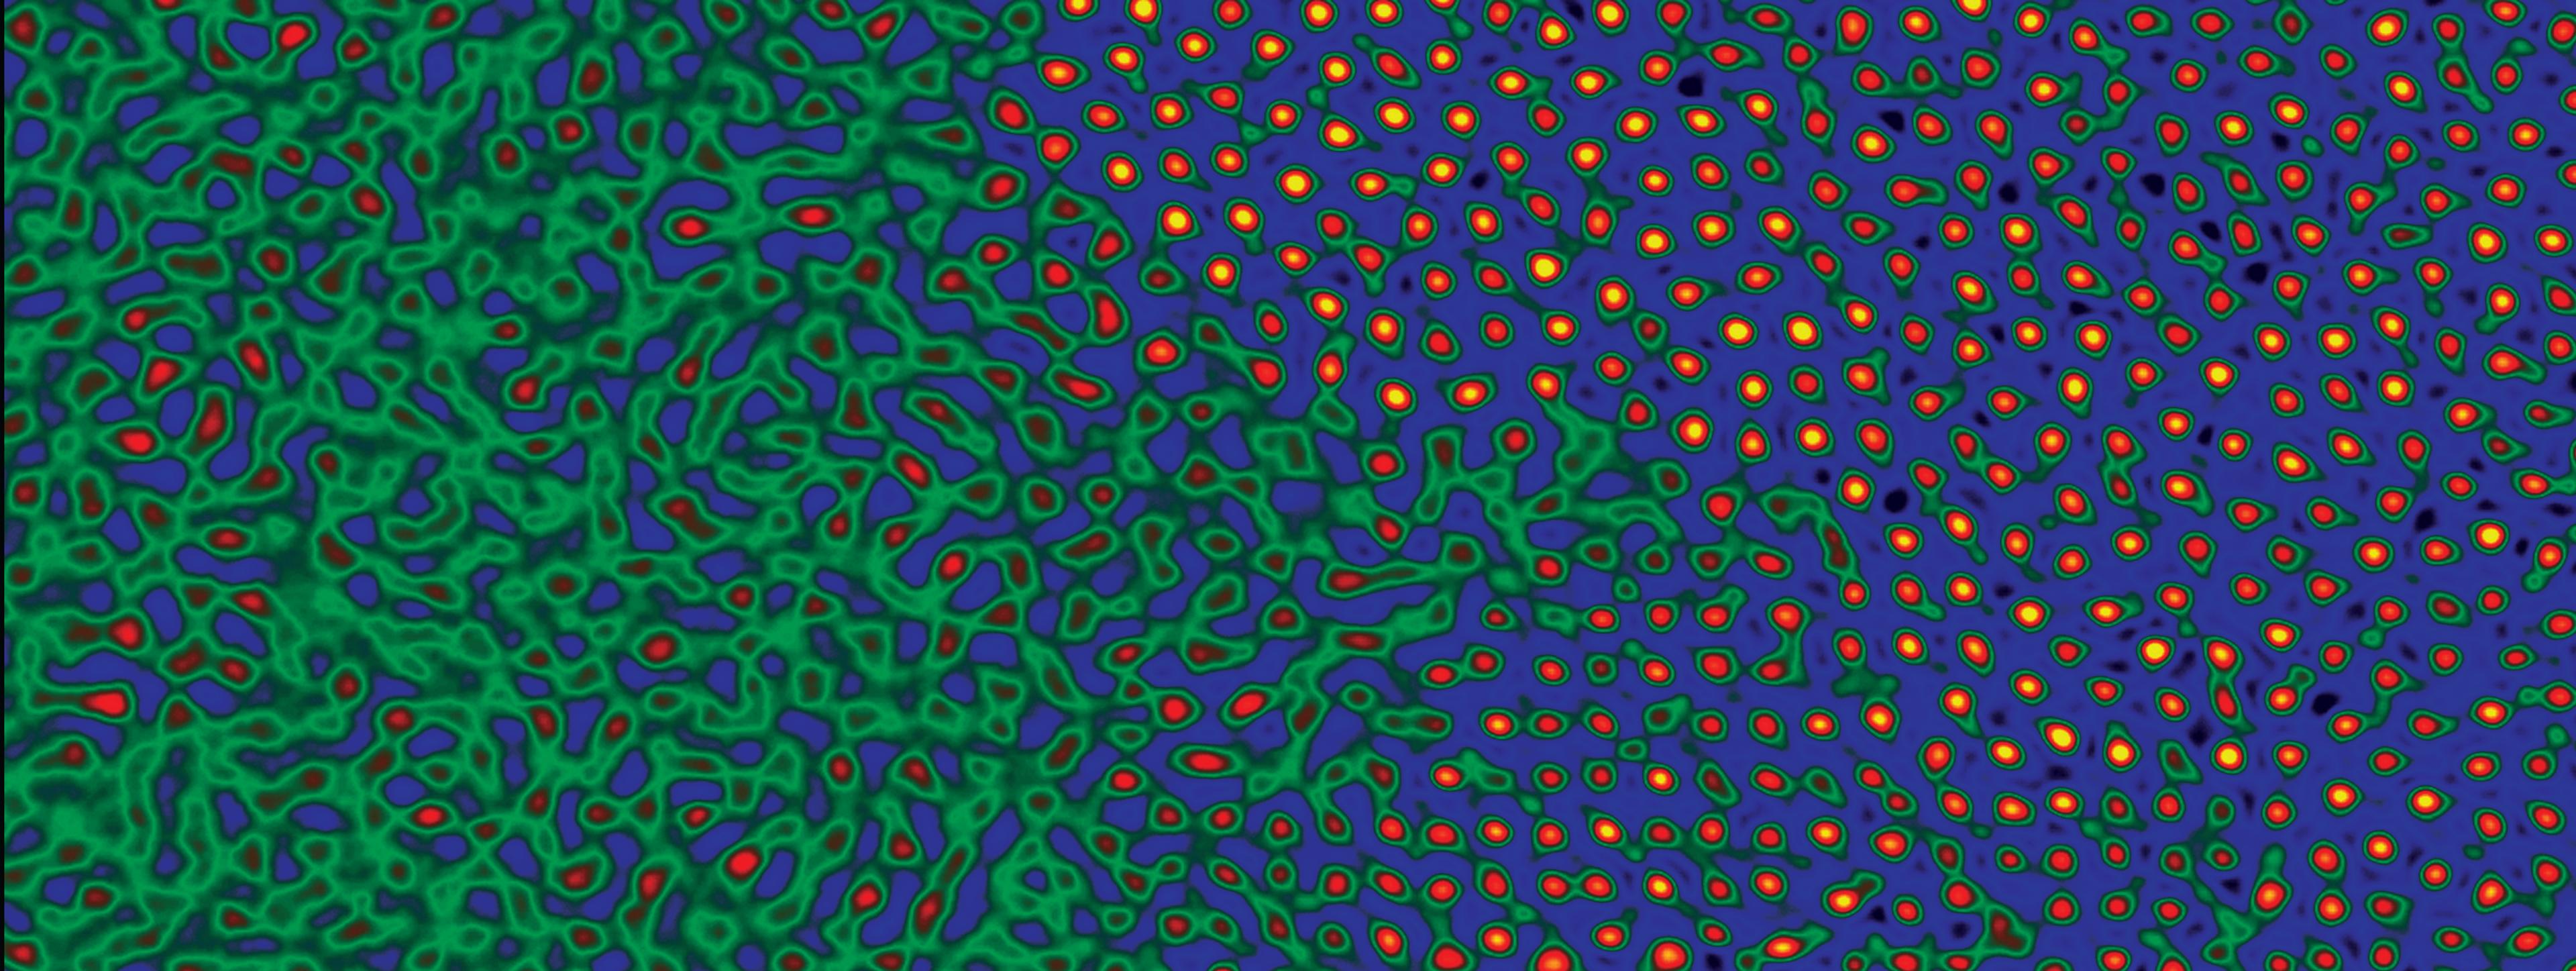 Aberration-corrected transmission electron microscopy image of a thin film of the relaxor ferroelectric Ca0.28Ba0.72nb2O6on a srtiO3 substrate (in false colours). Both the amorphous area on the left (with predominant green colour), created by ion milling during processing, and the complex structure of the material viewed from the [001] crystallographic axis are clearly resolved. image courtesy of Chun-lin Jia.